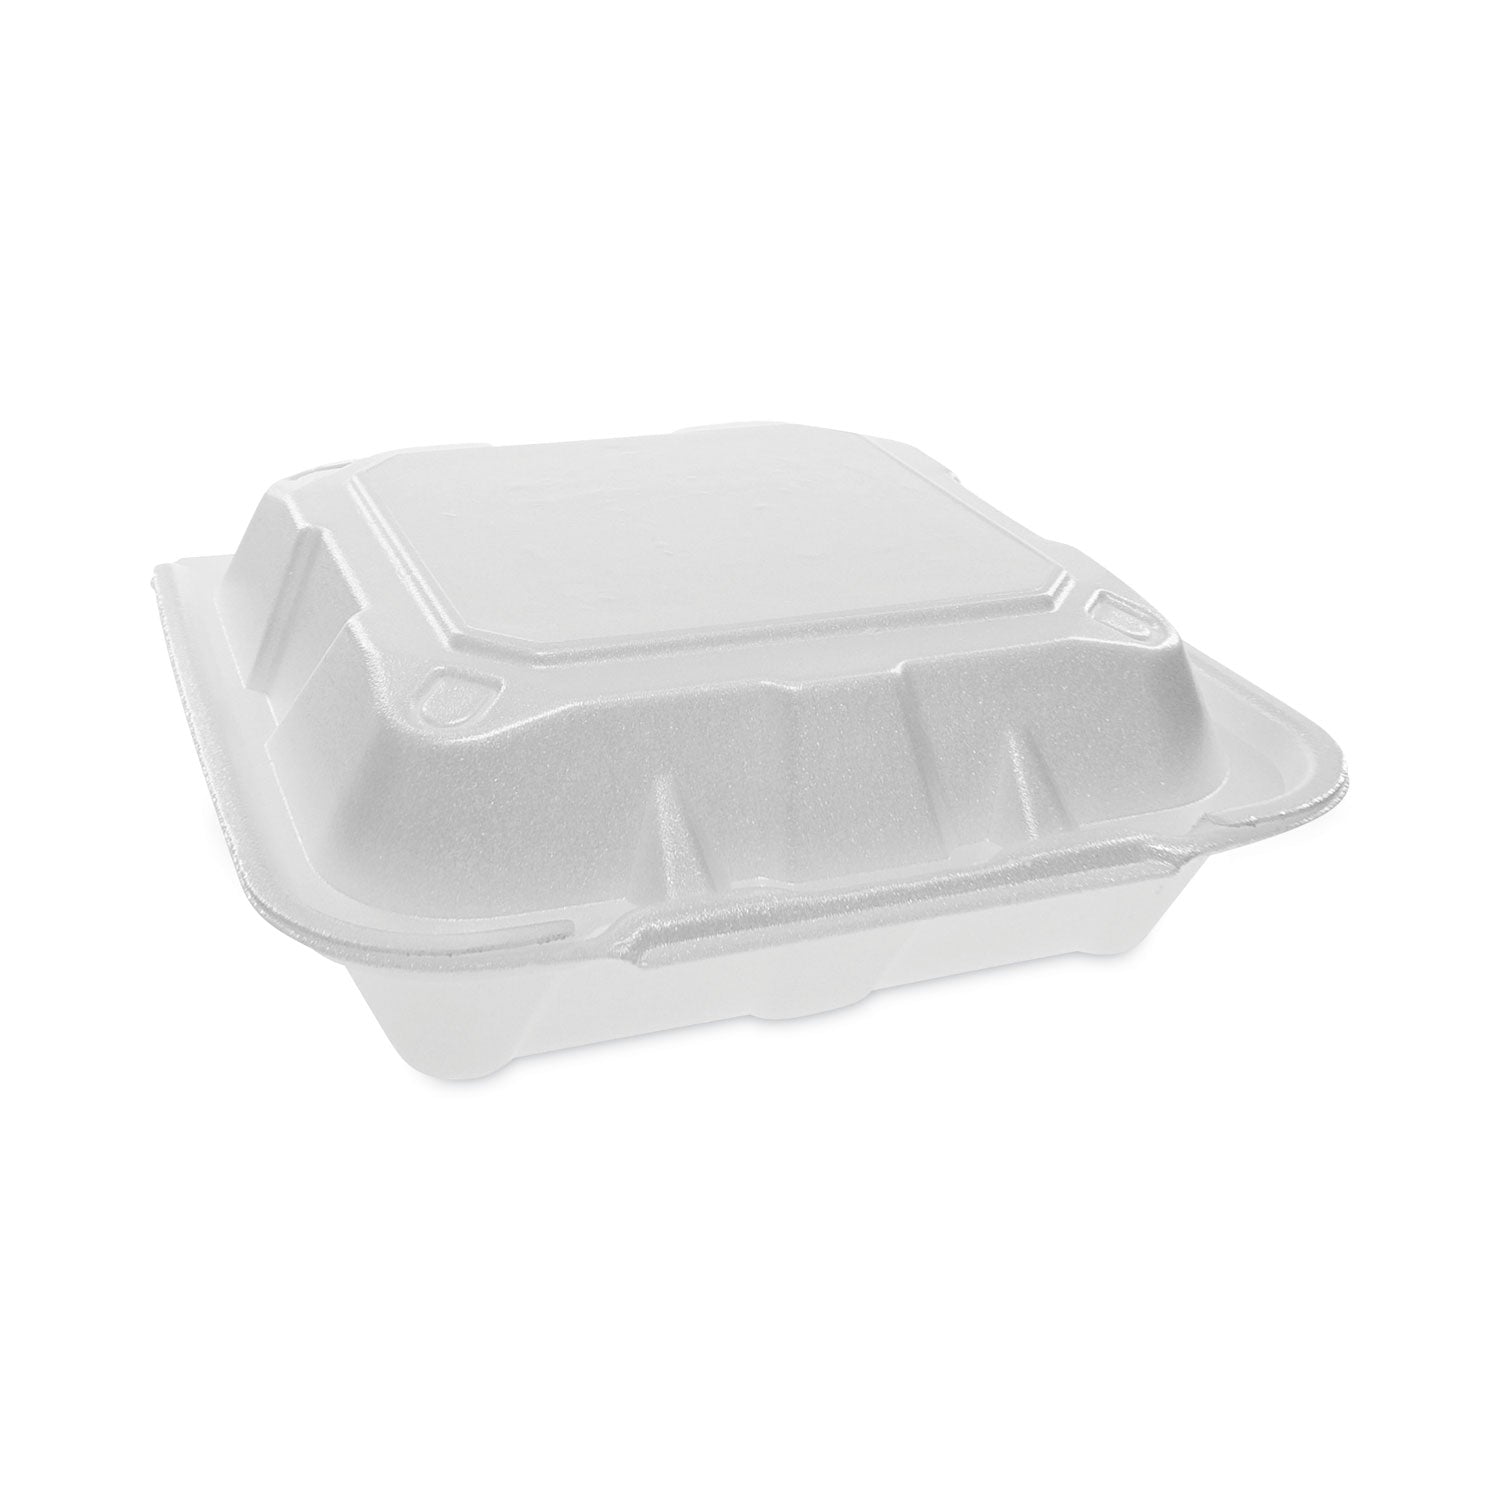 vented-foam-hinged-lid-container-dual-tab-lock-842-x-815-x-3-white-150-carton_pctytd188010000 - 1